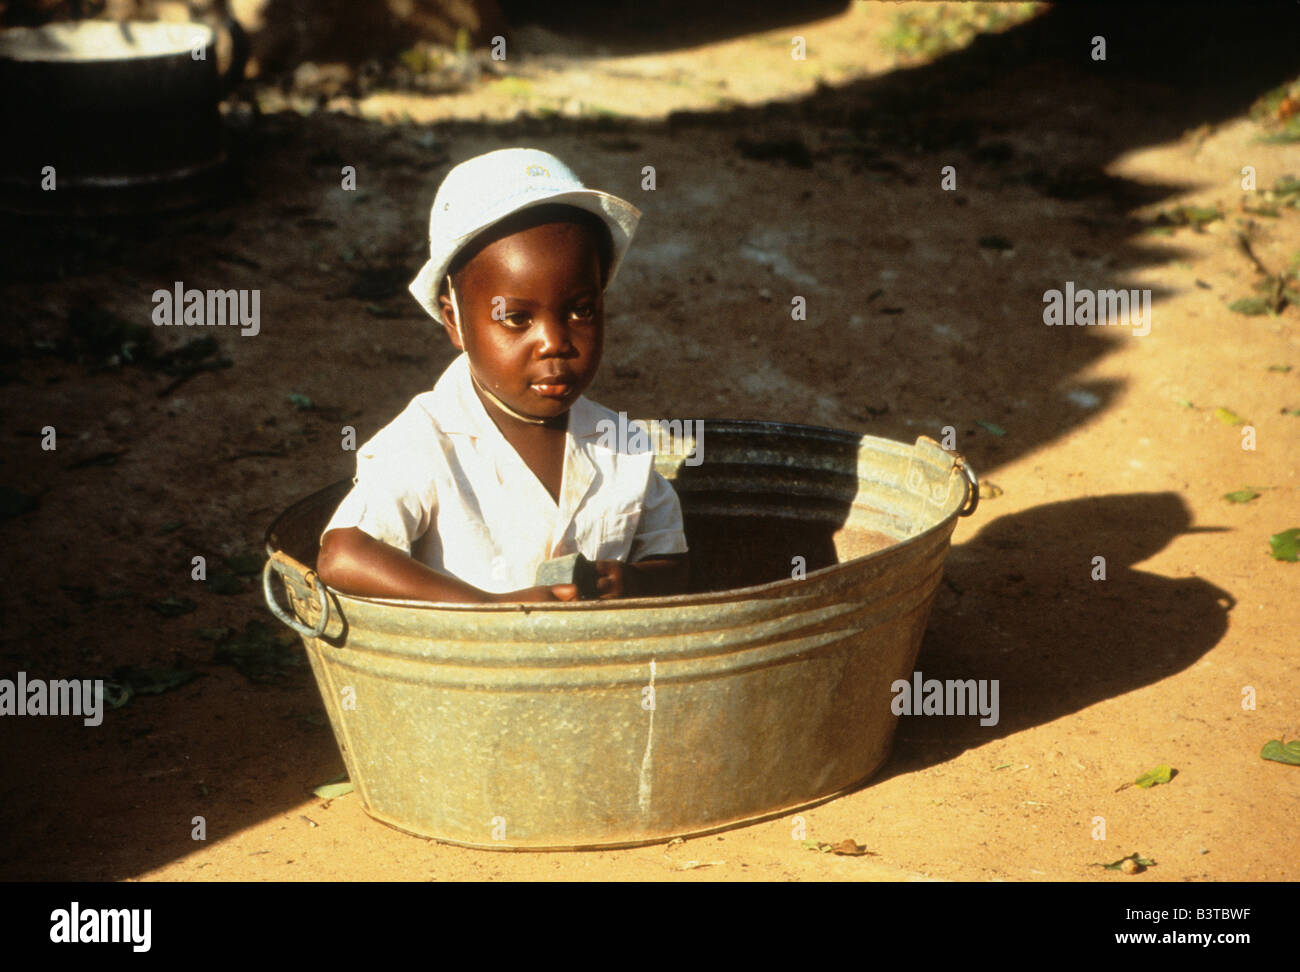 Africa, Zimbabwe. African child sits in tub on private ranch. Stock Photo